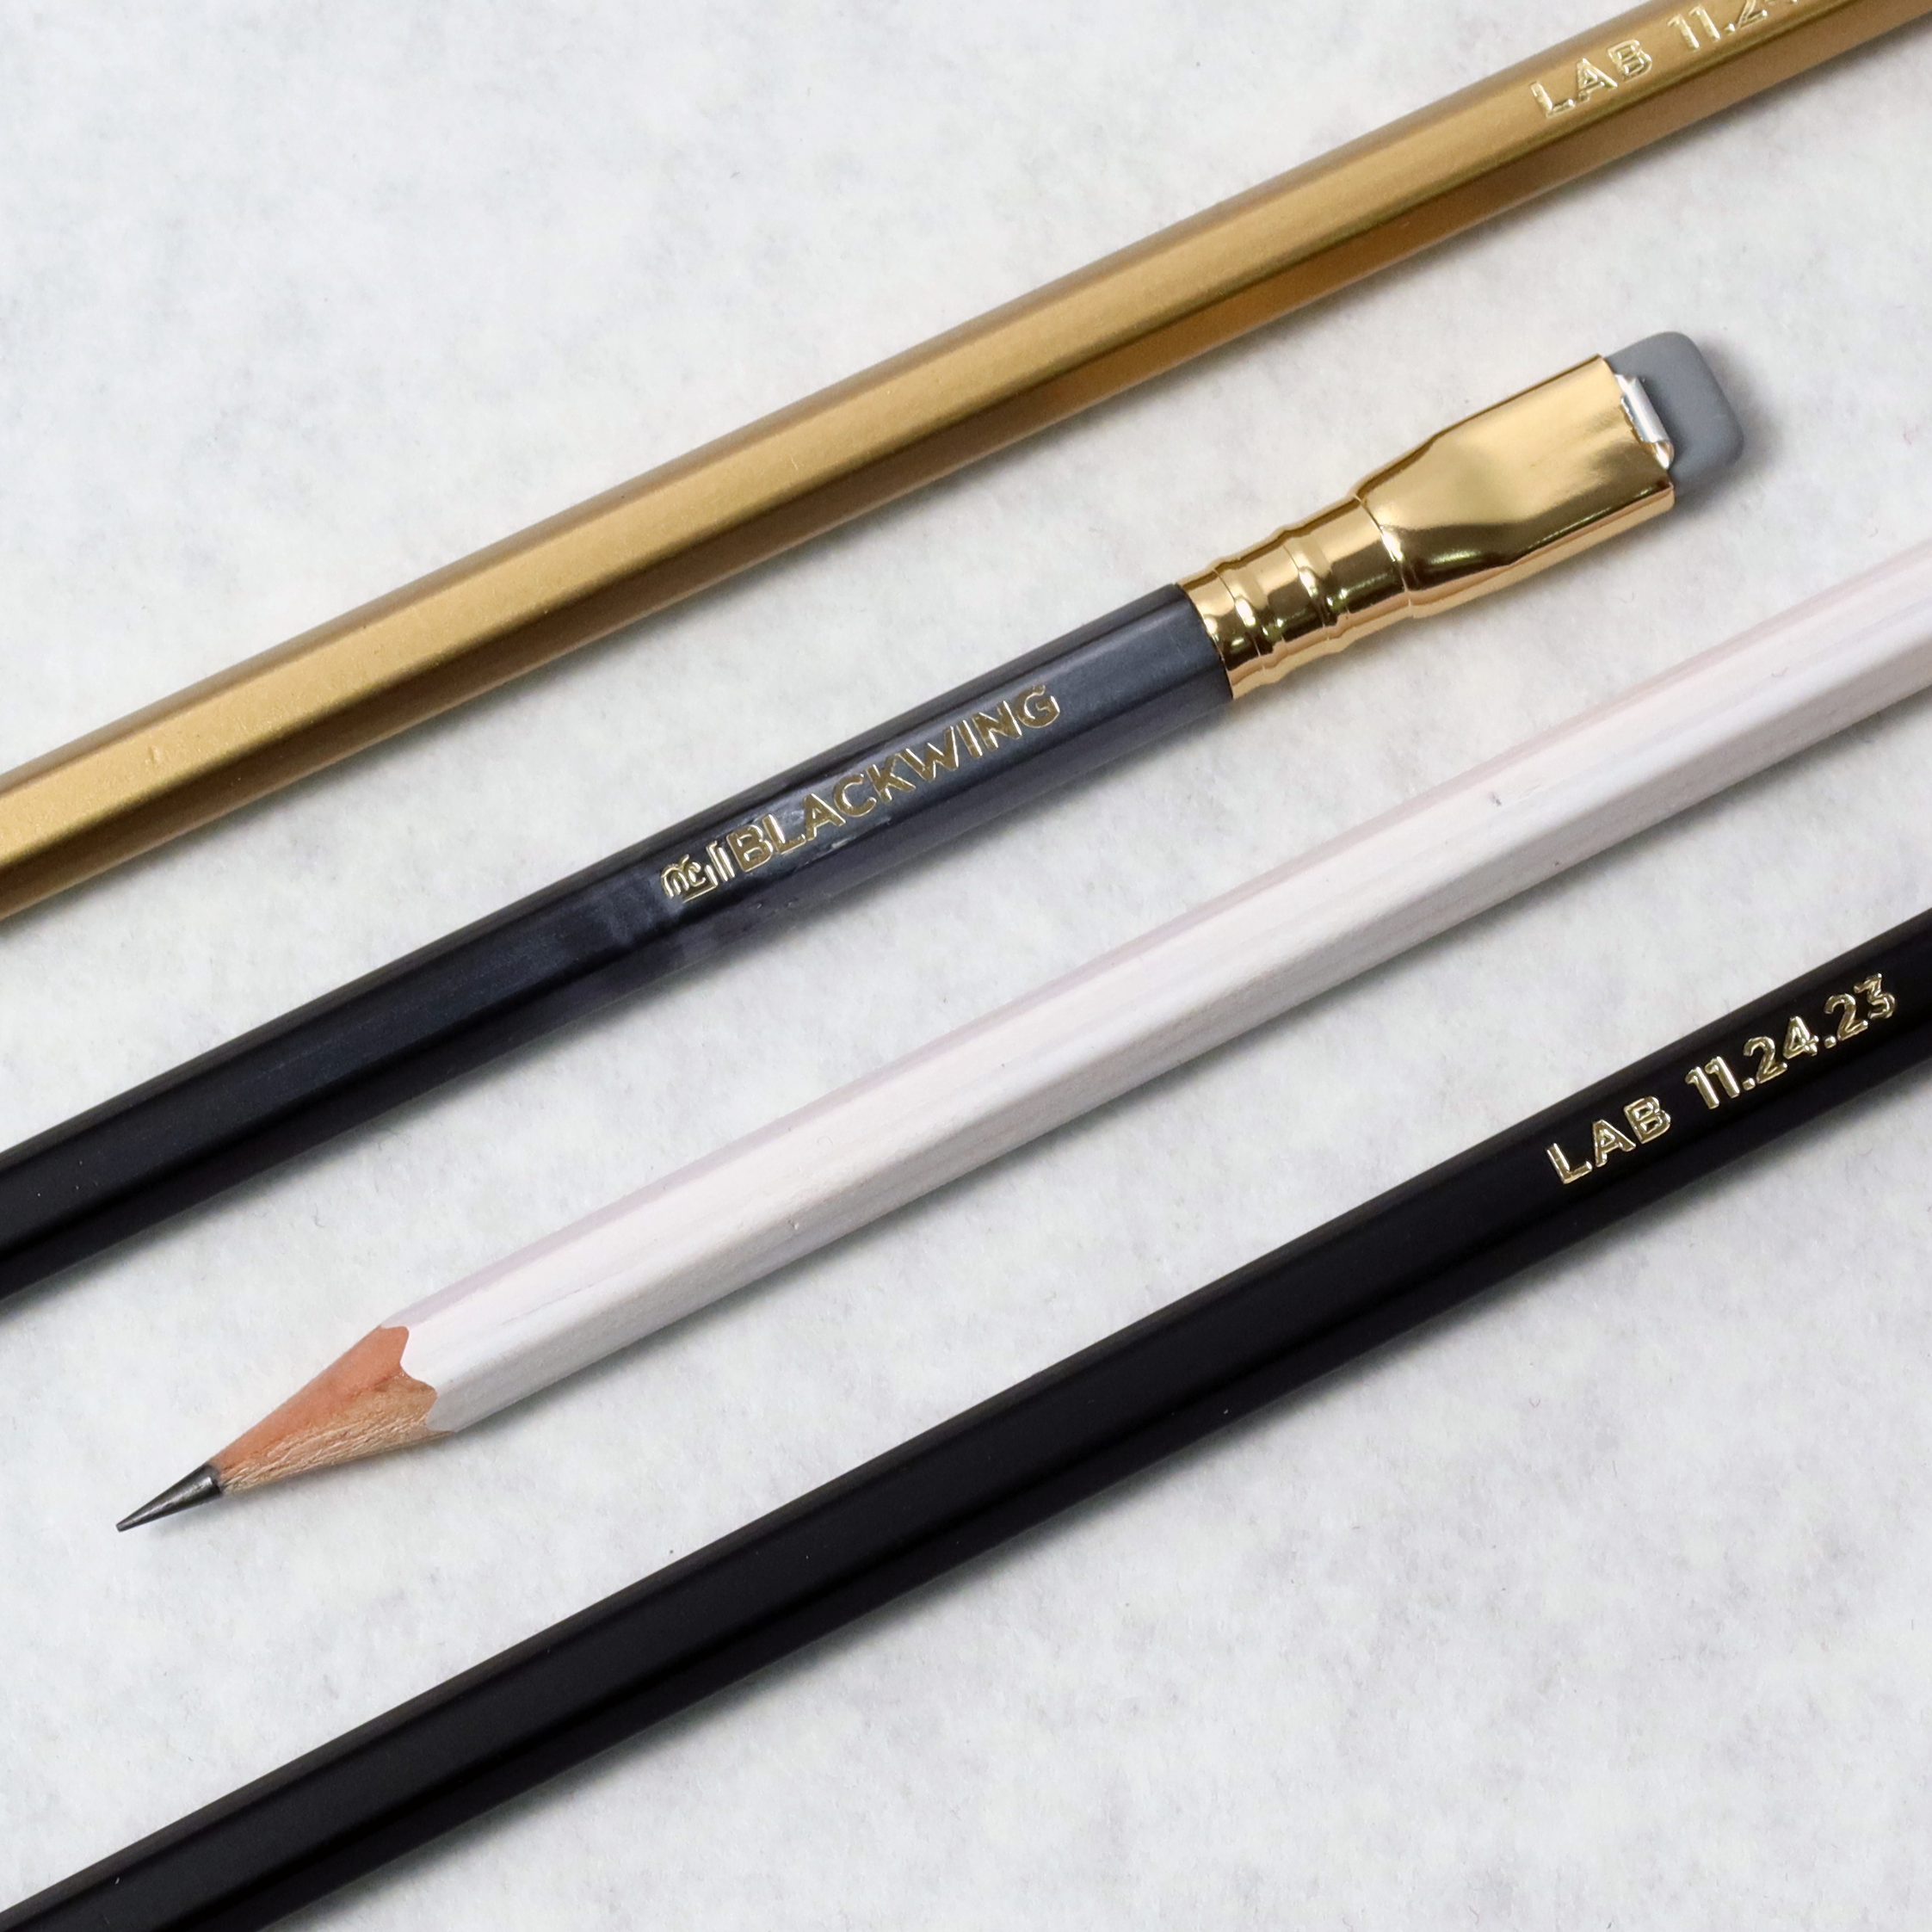 Three Blackwing Lab 11.24.23 pencils on a white surface.